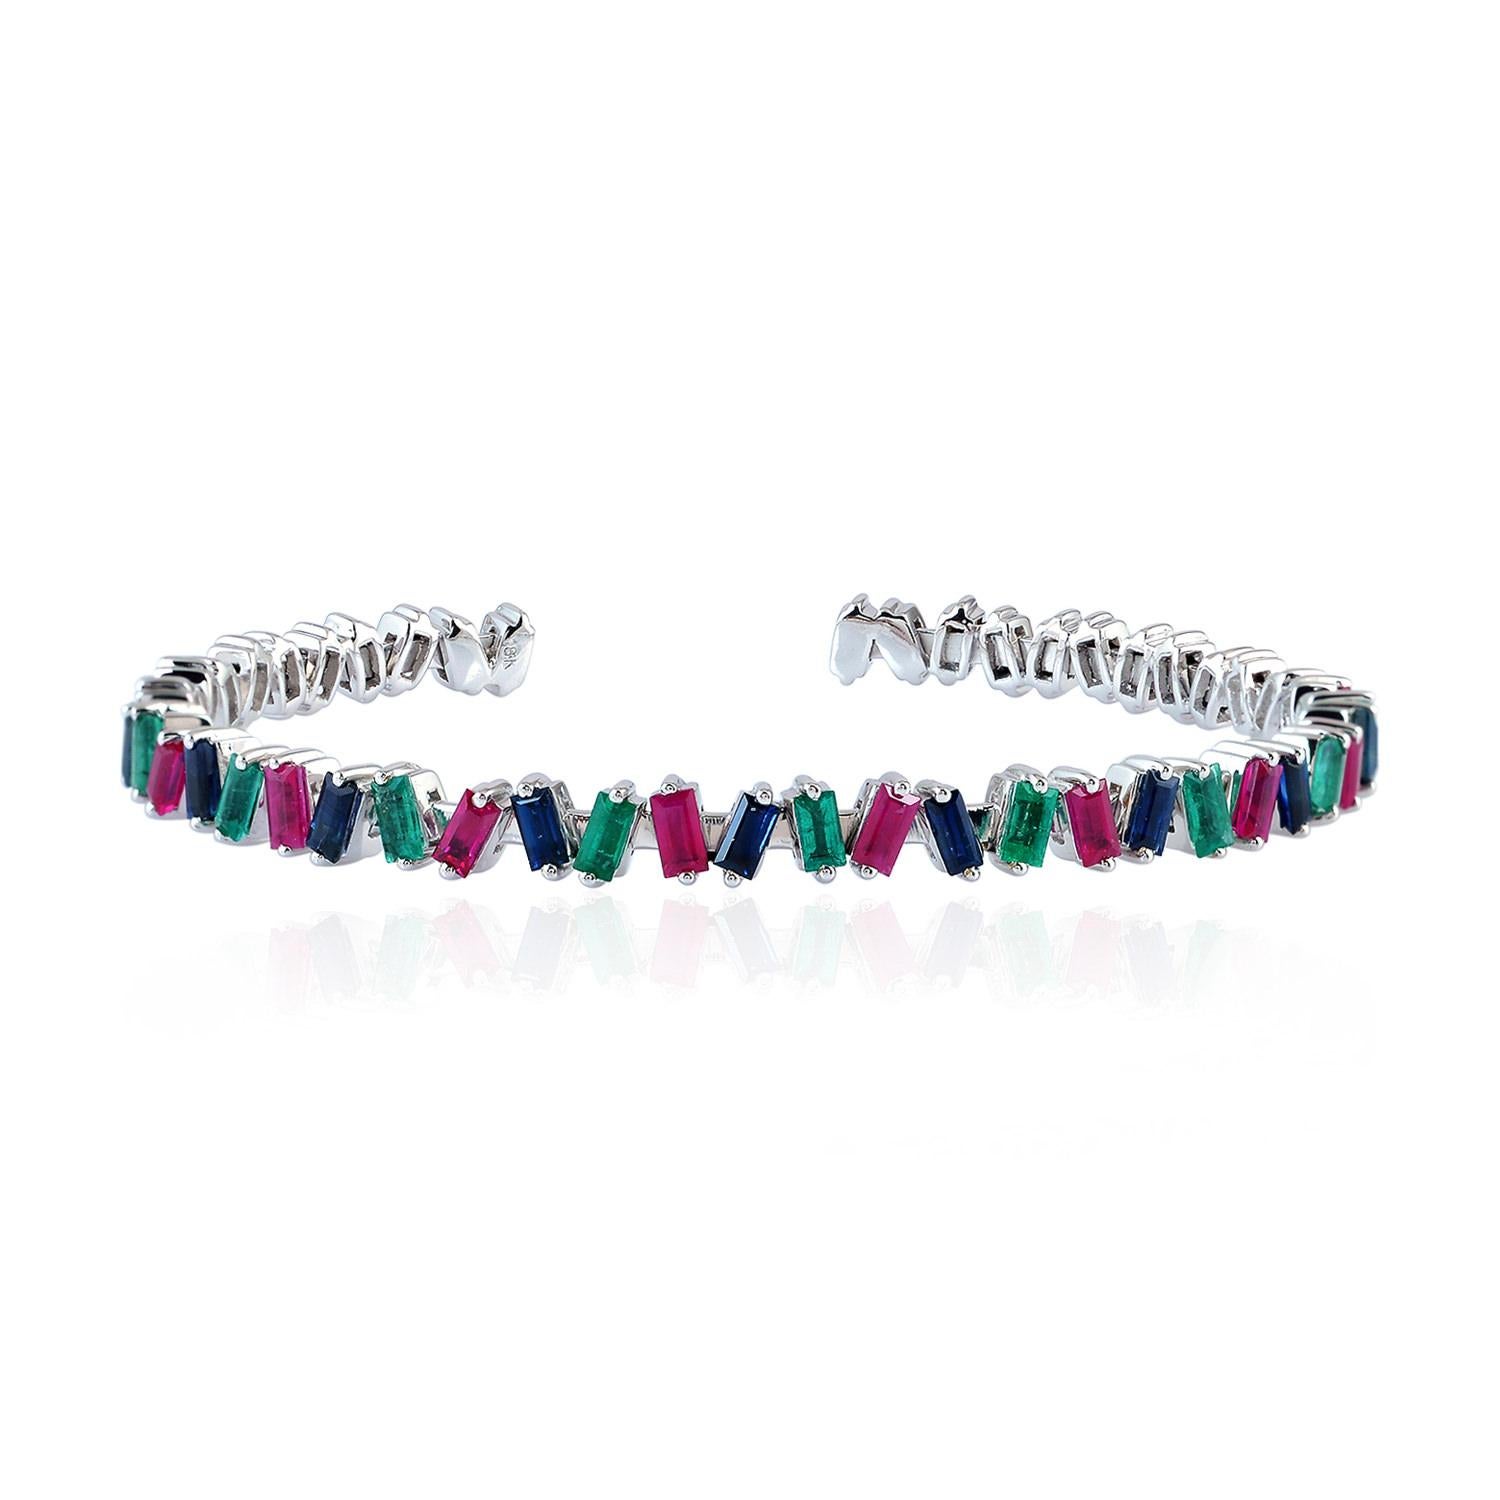 A beautiful bracelet handmade in 18K gold. It is set in 1.19 carats of baguette emeralds, 1.63 carats baguette rubies and baguette blue sapphire. Wear it alone or stack it with your favorite pieces. Bangle circumference is 6-in. Bangle is 3/16-in.